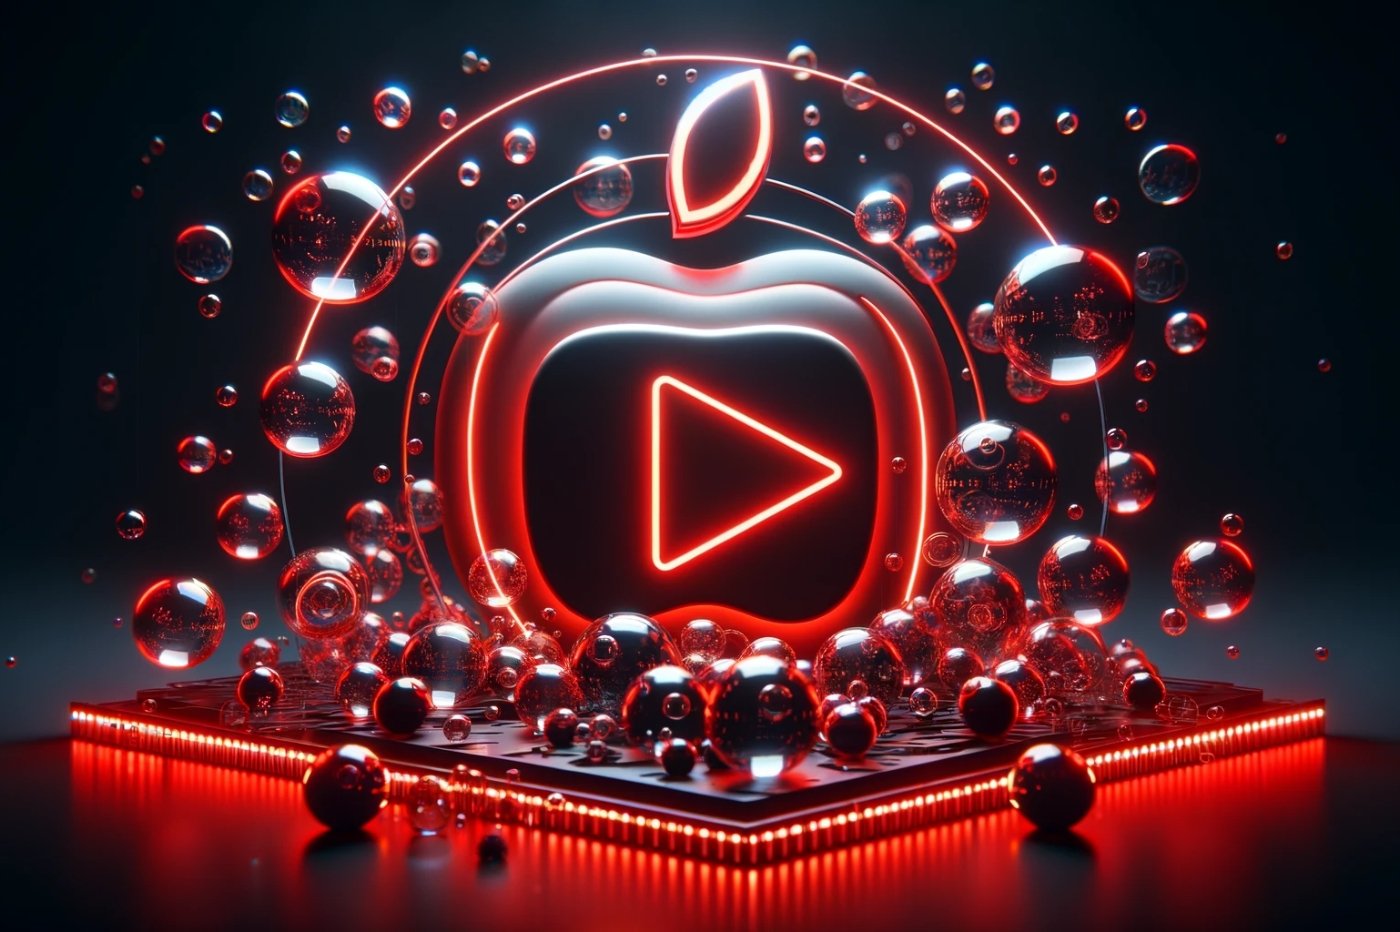 YouTube x Apple by Dall-E x iPhon.fr